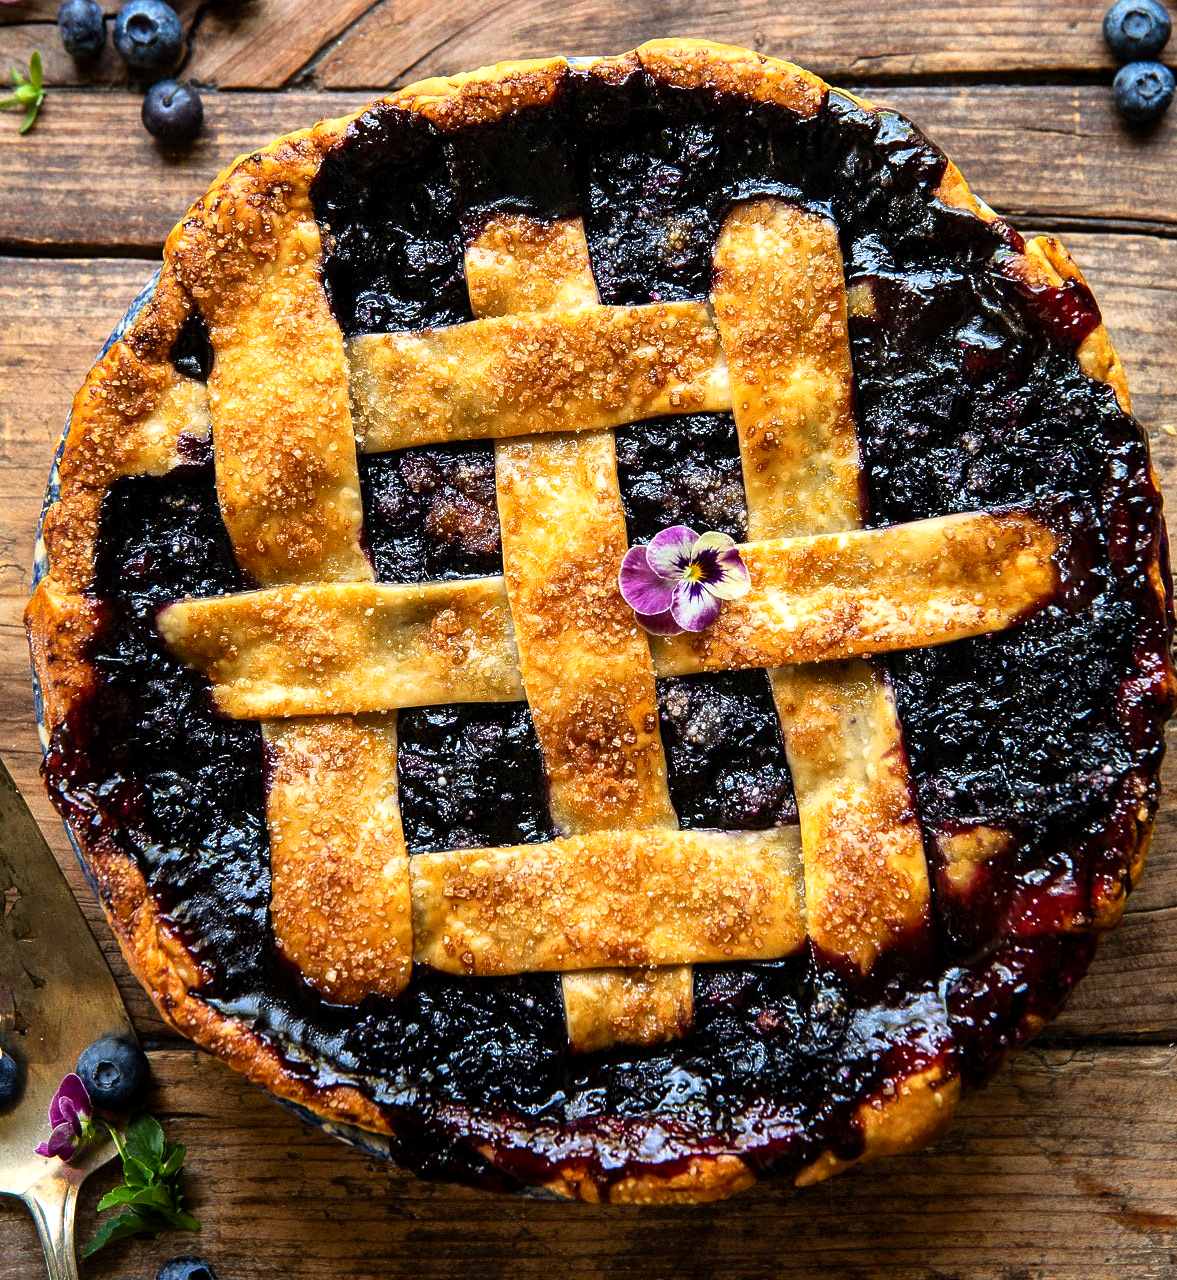 Largest prize for an online Blueberry Pie Contest: the U.S. Highbush Blueberry Council sets world record